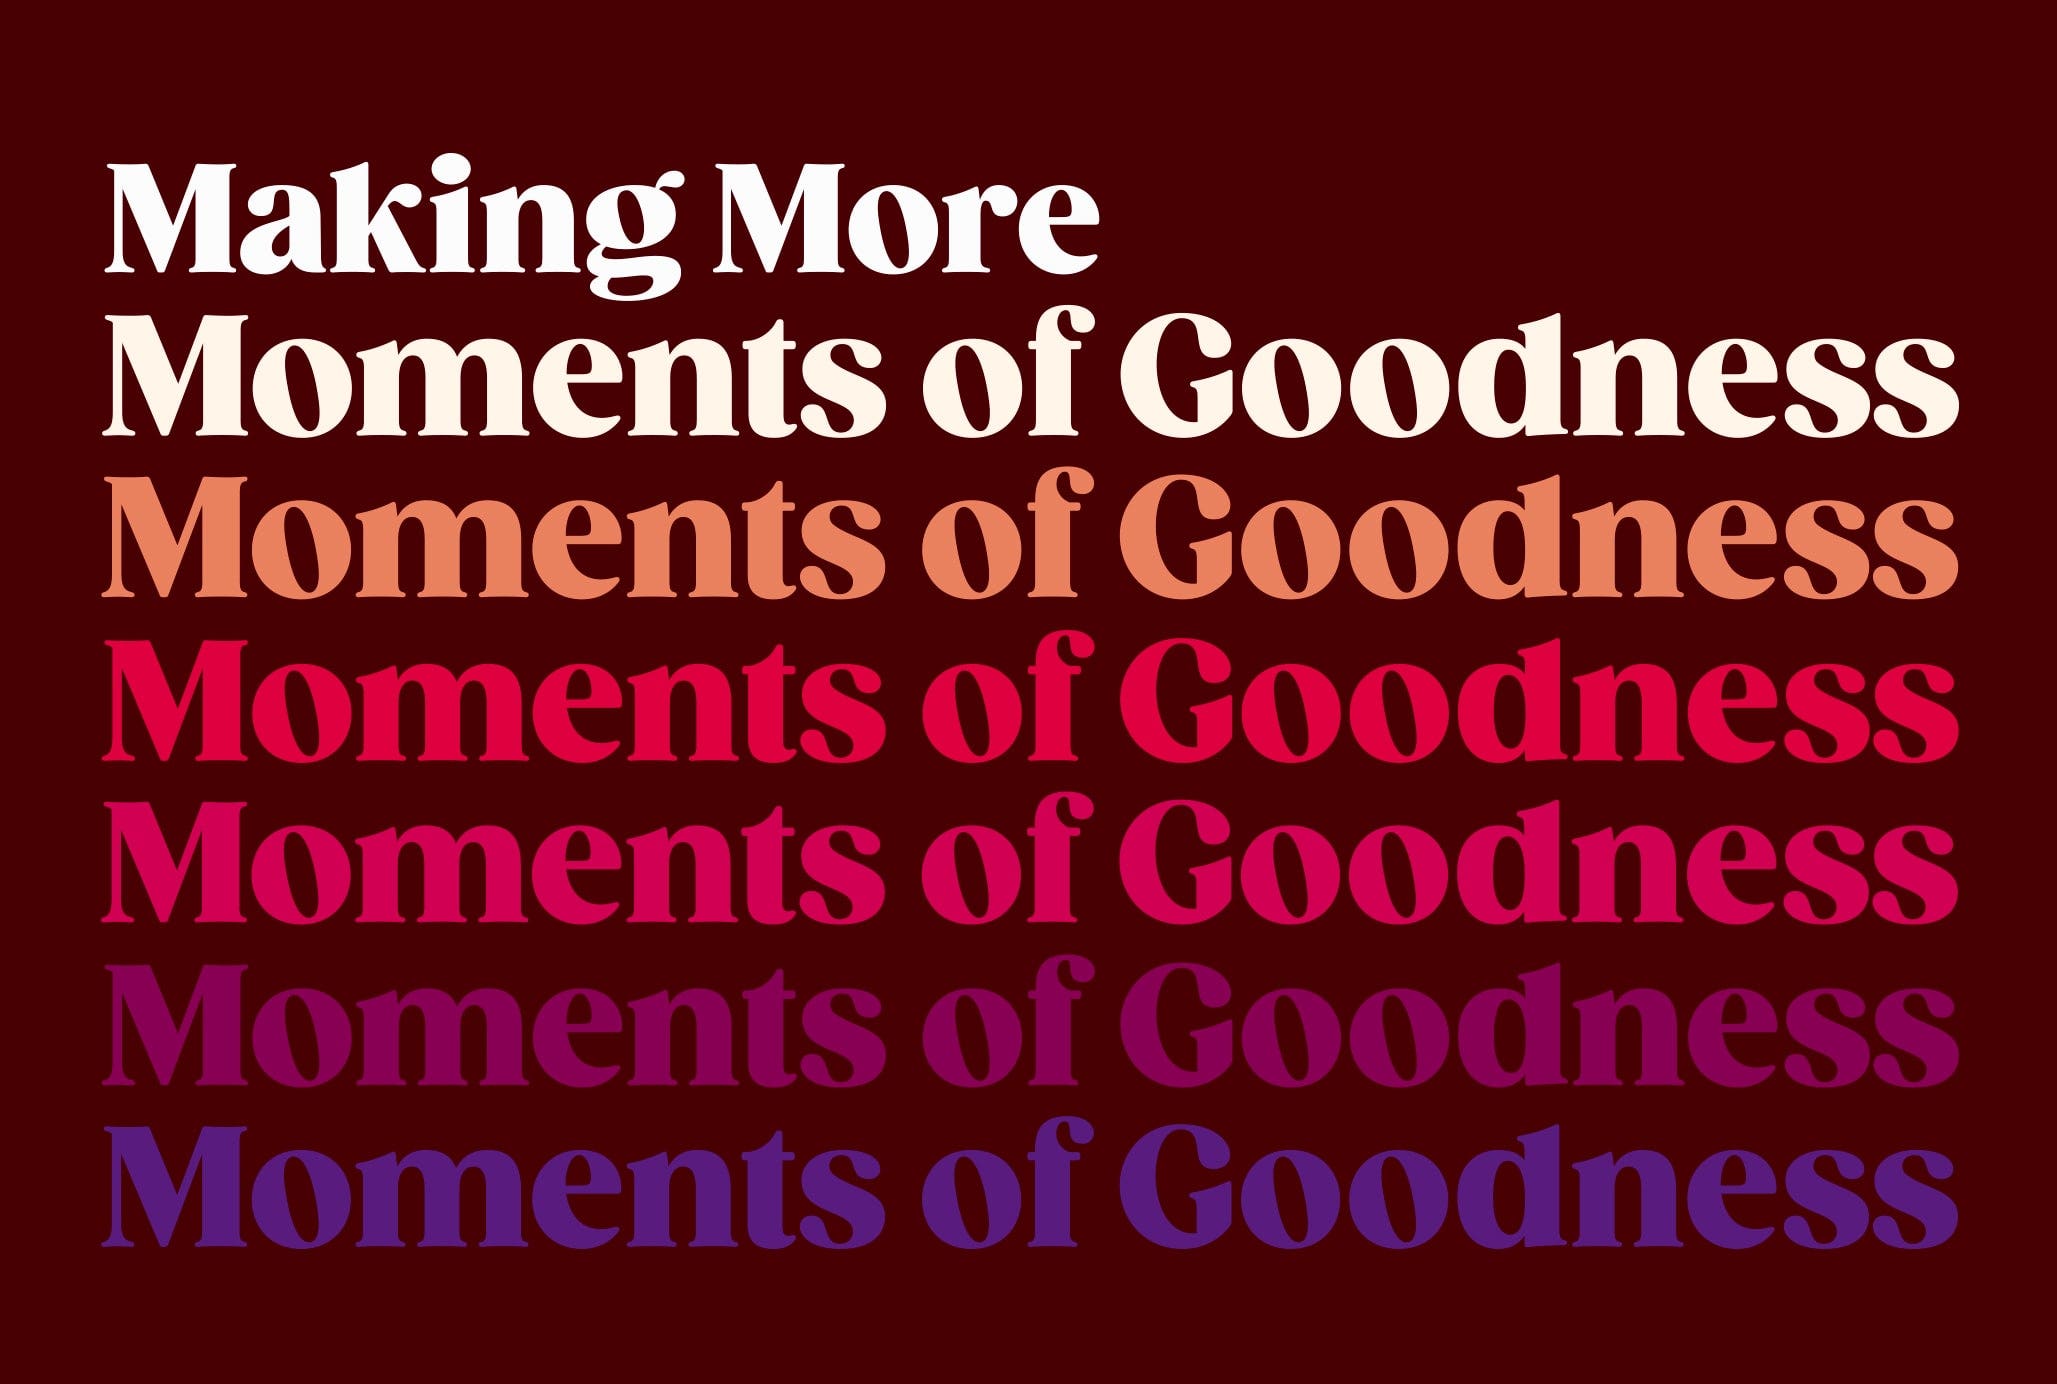 moments of goodness